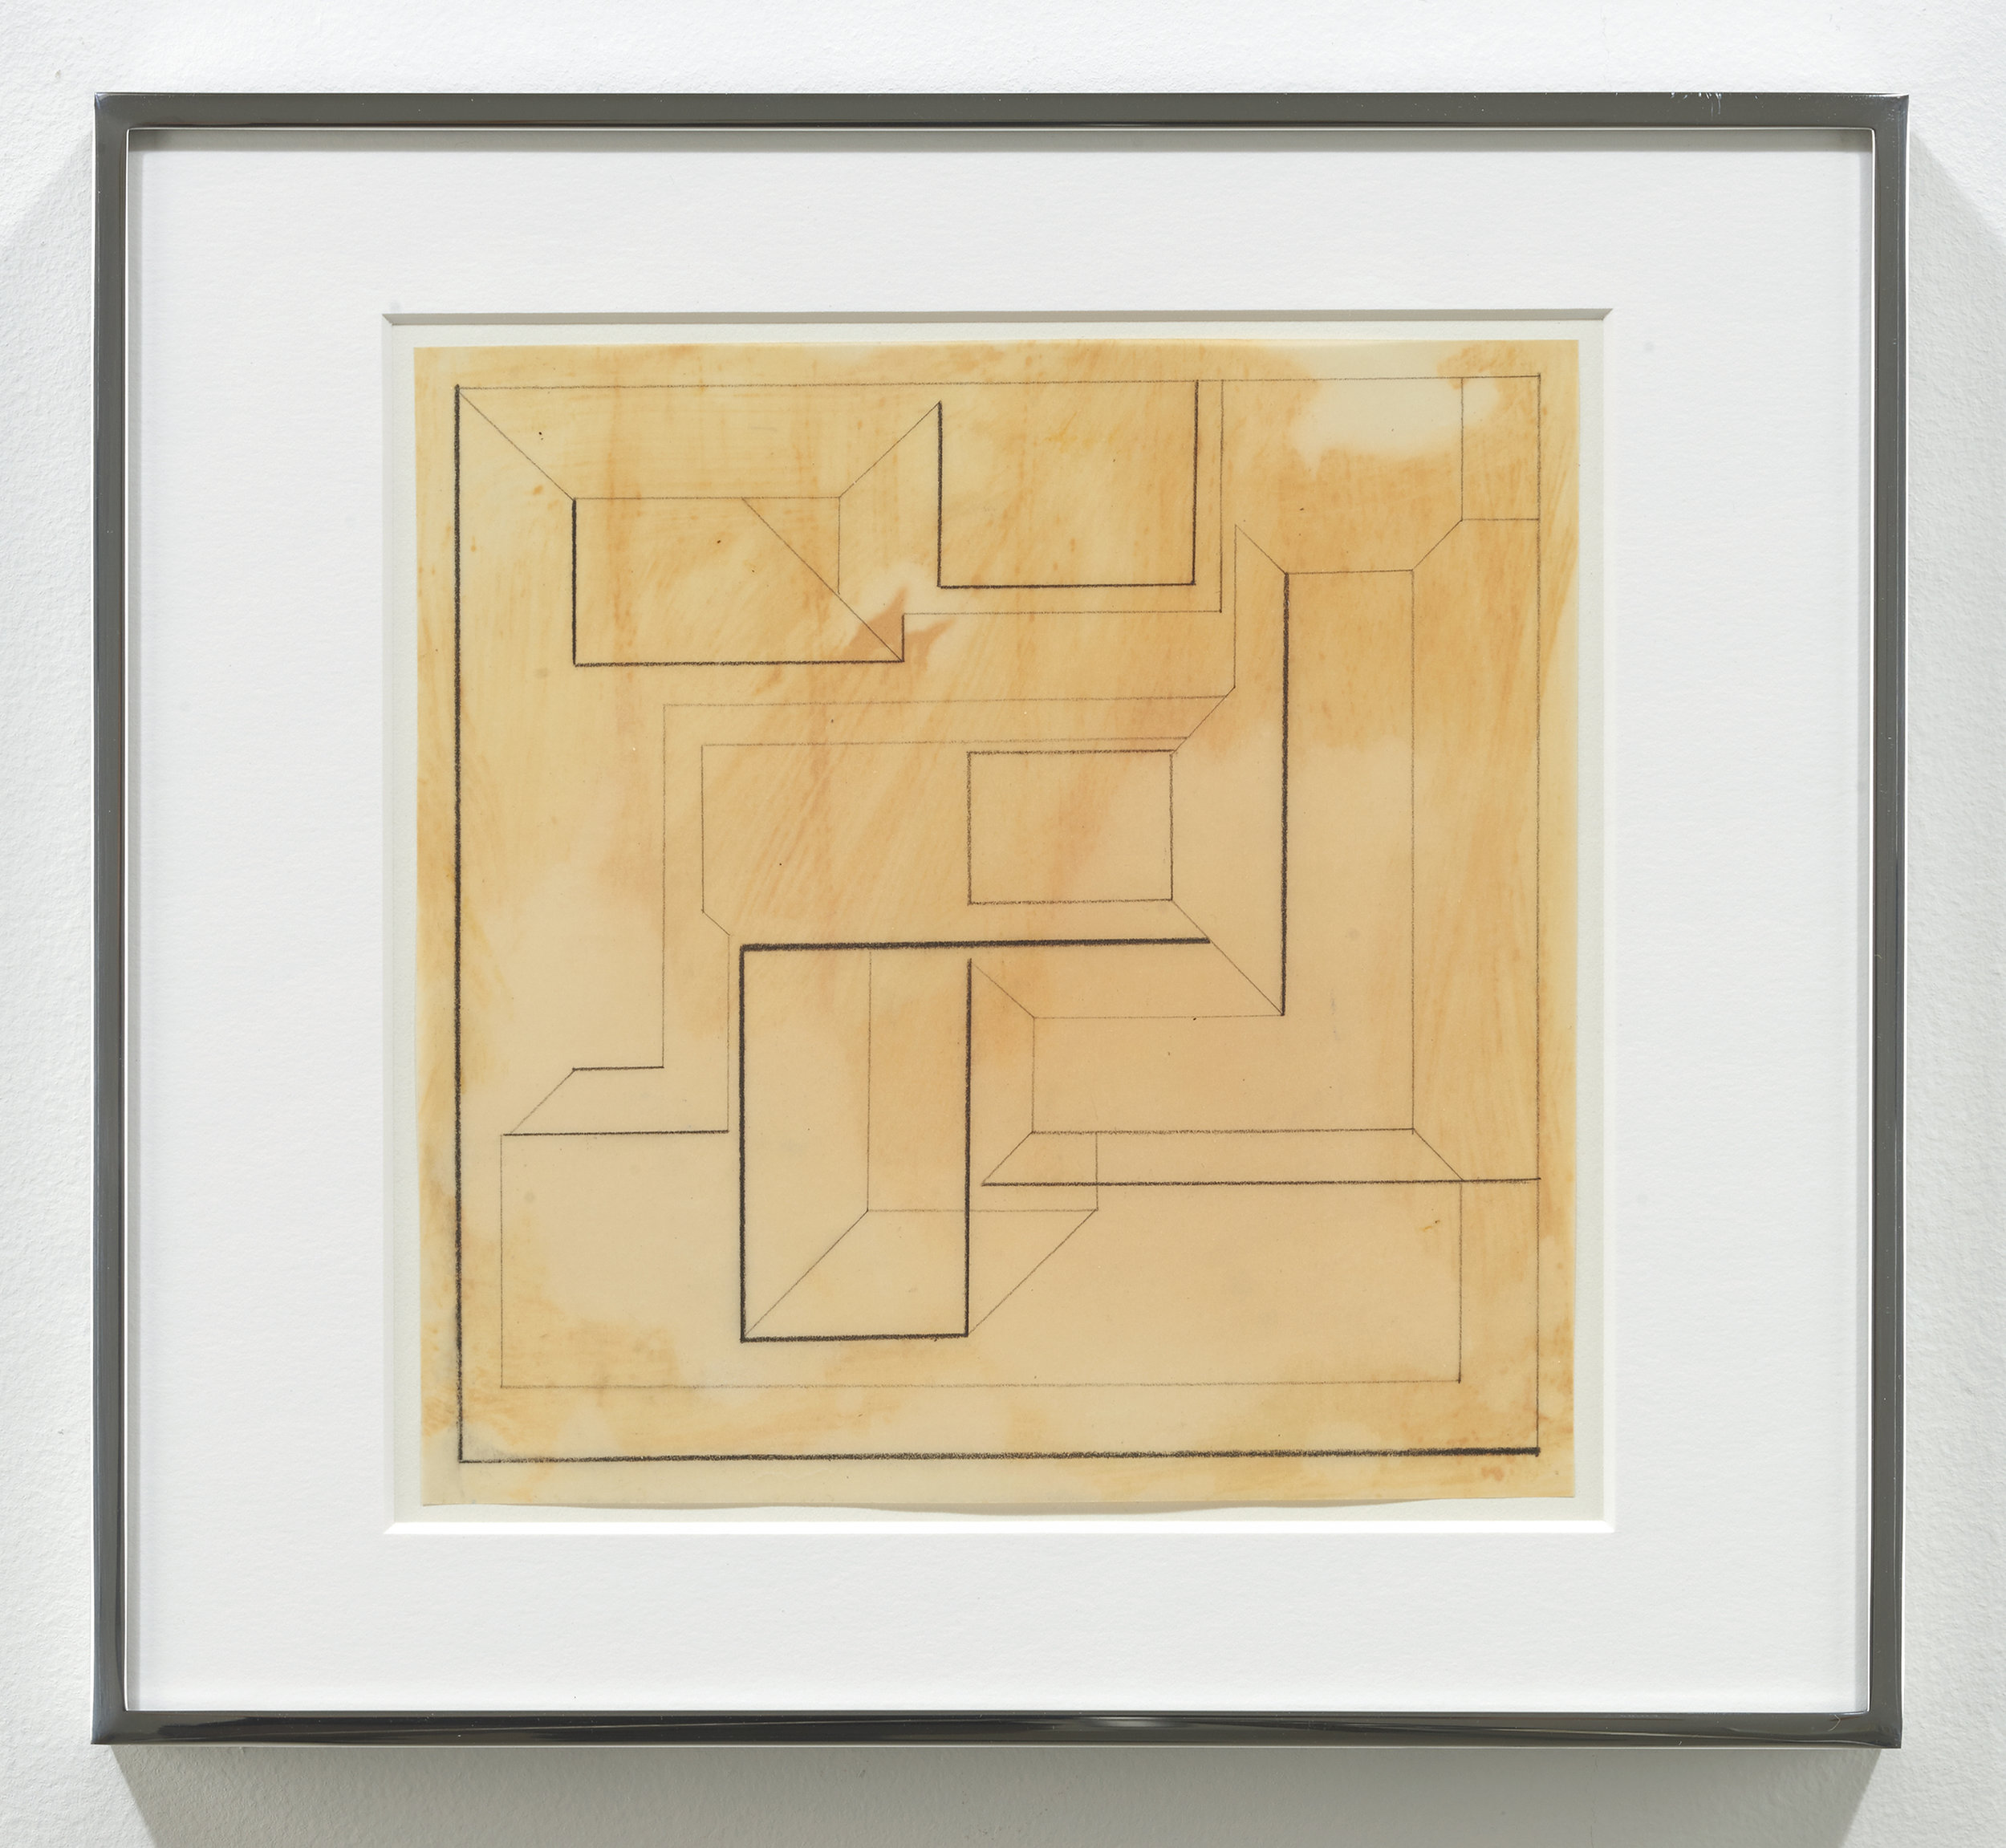  Suzanne Blank Redstone,  Drawing for Construction #1, 1968 , Paper, tracing paper, pencil, Framed dimensions: 10.25 x 11.25 inches 